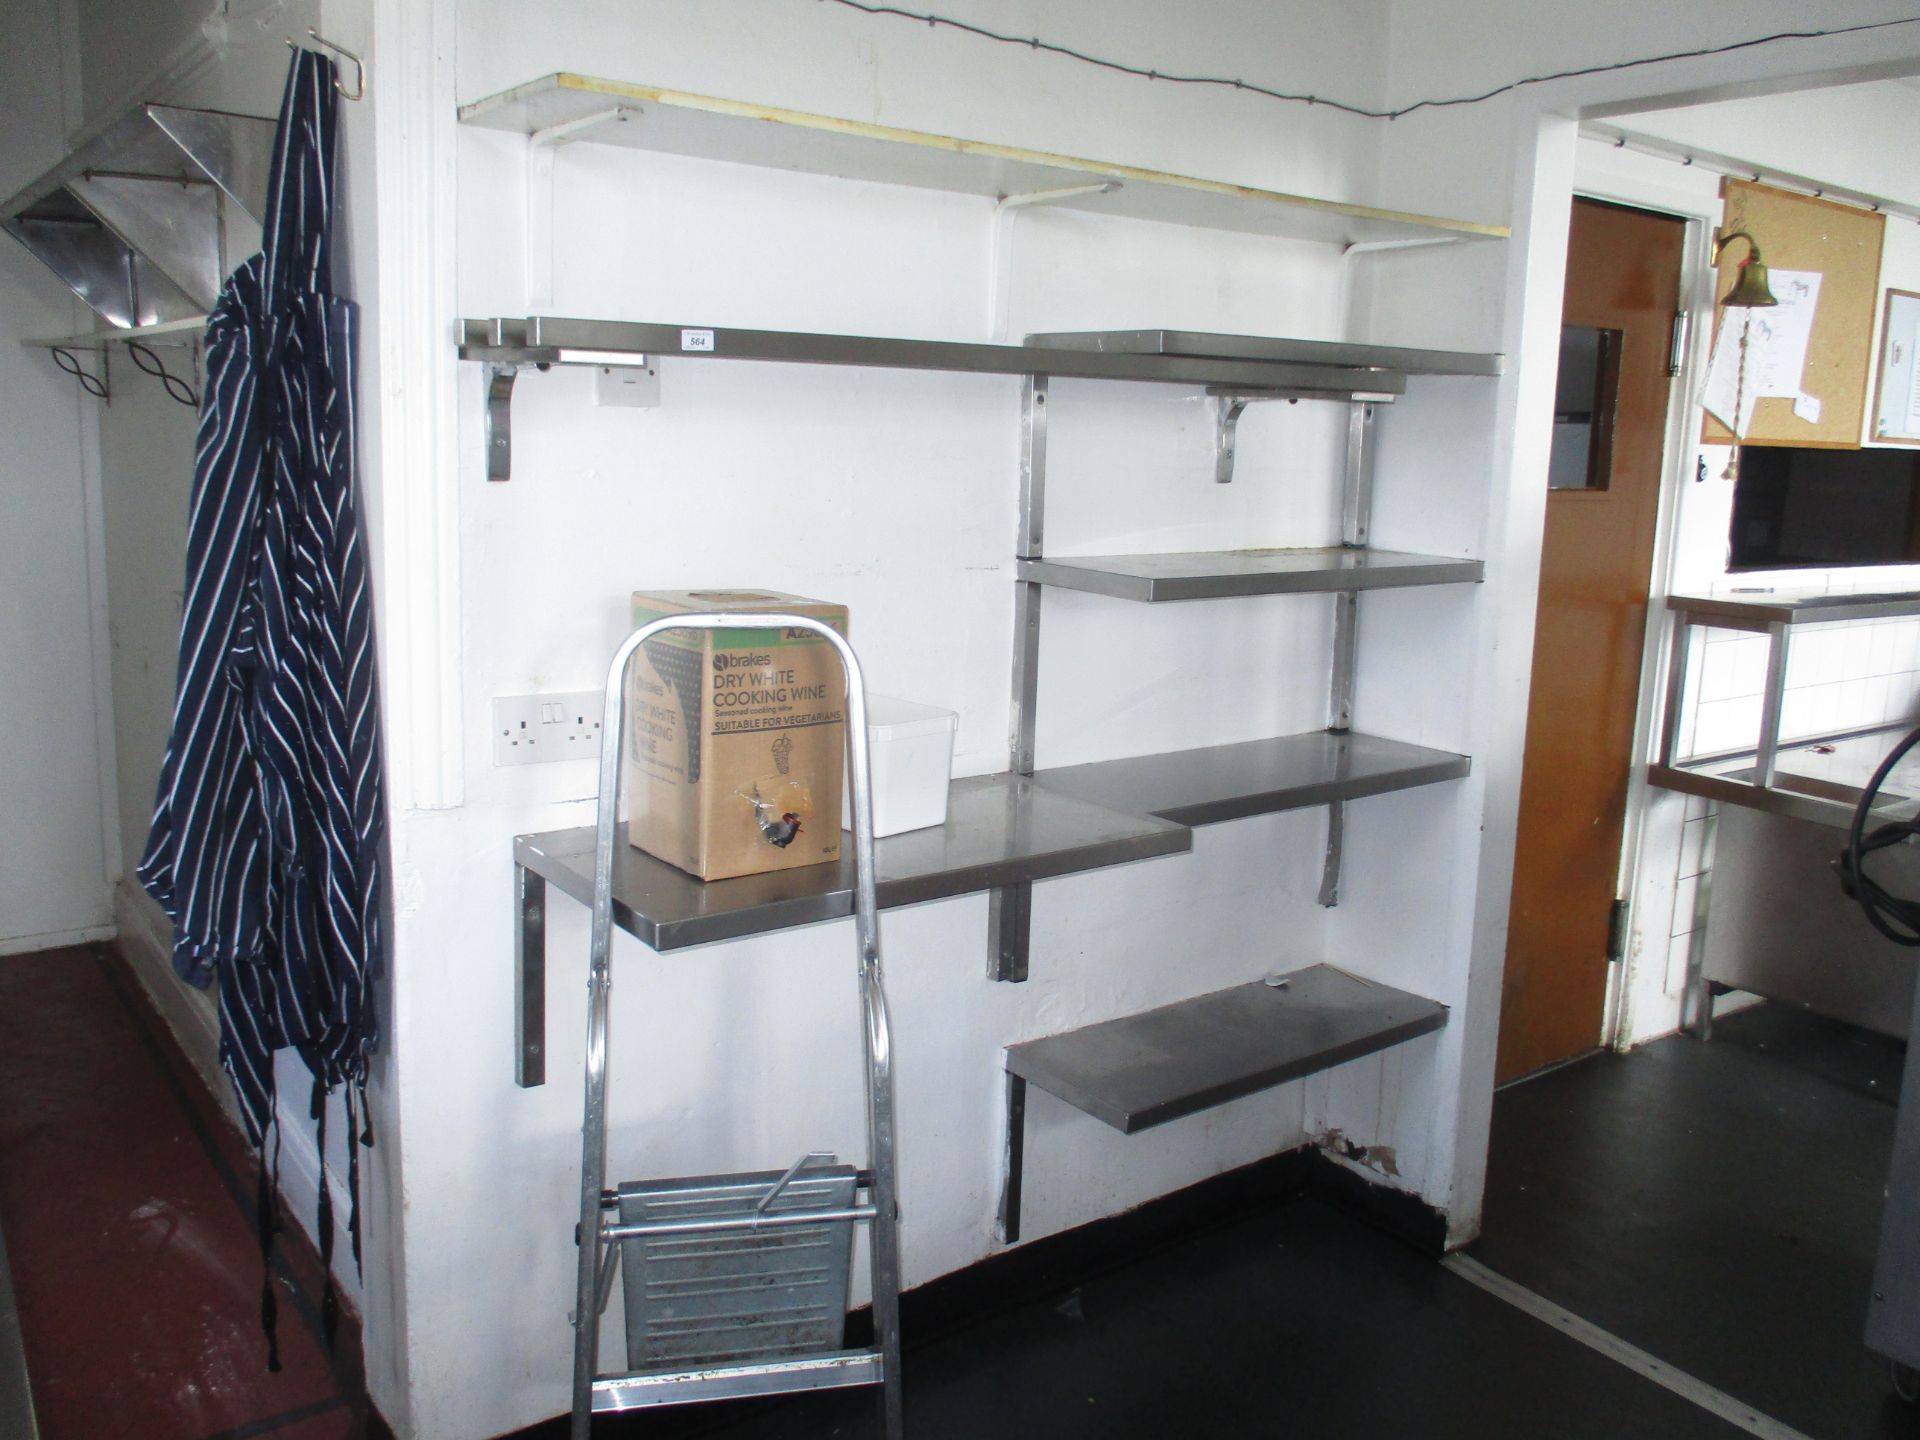 A quantity of wall mounted stainless steel shelving together with a small aluminium stepladder